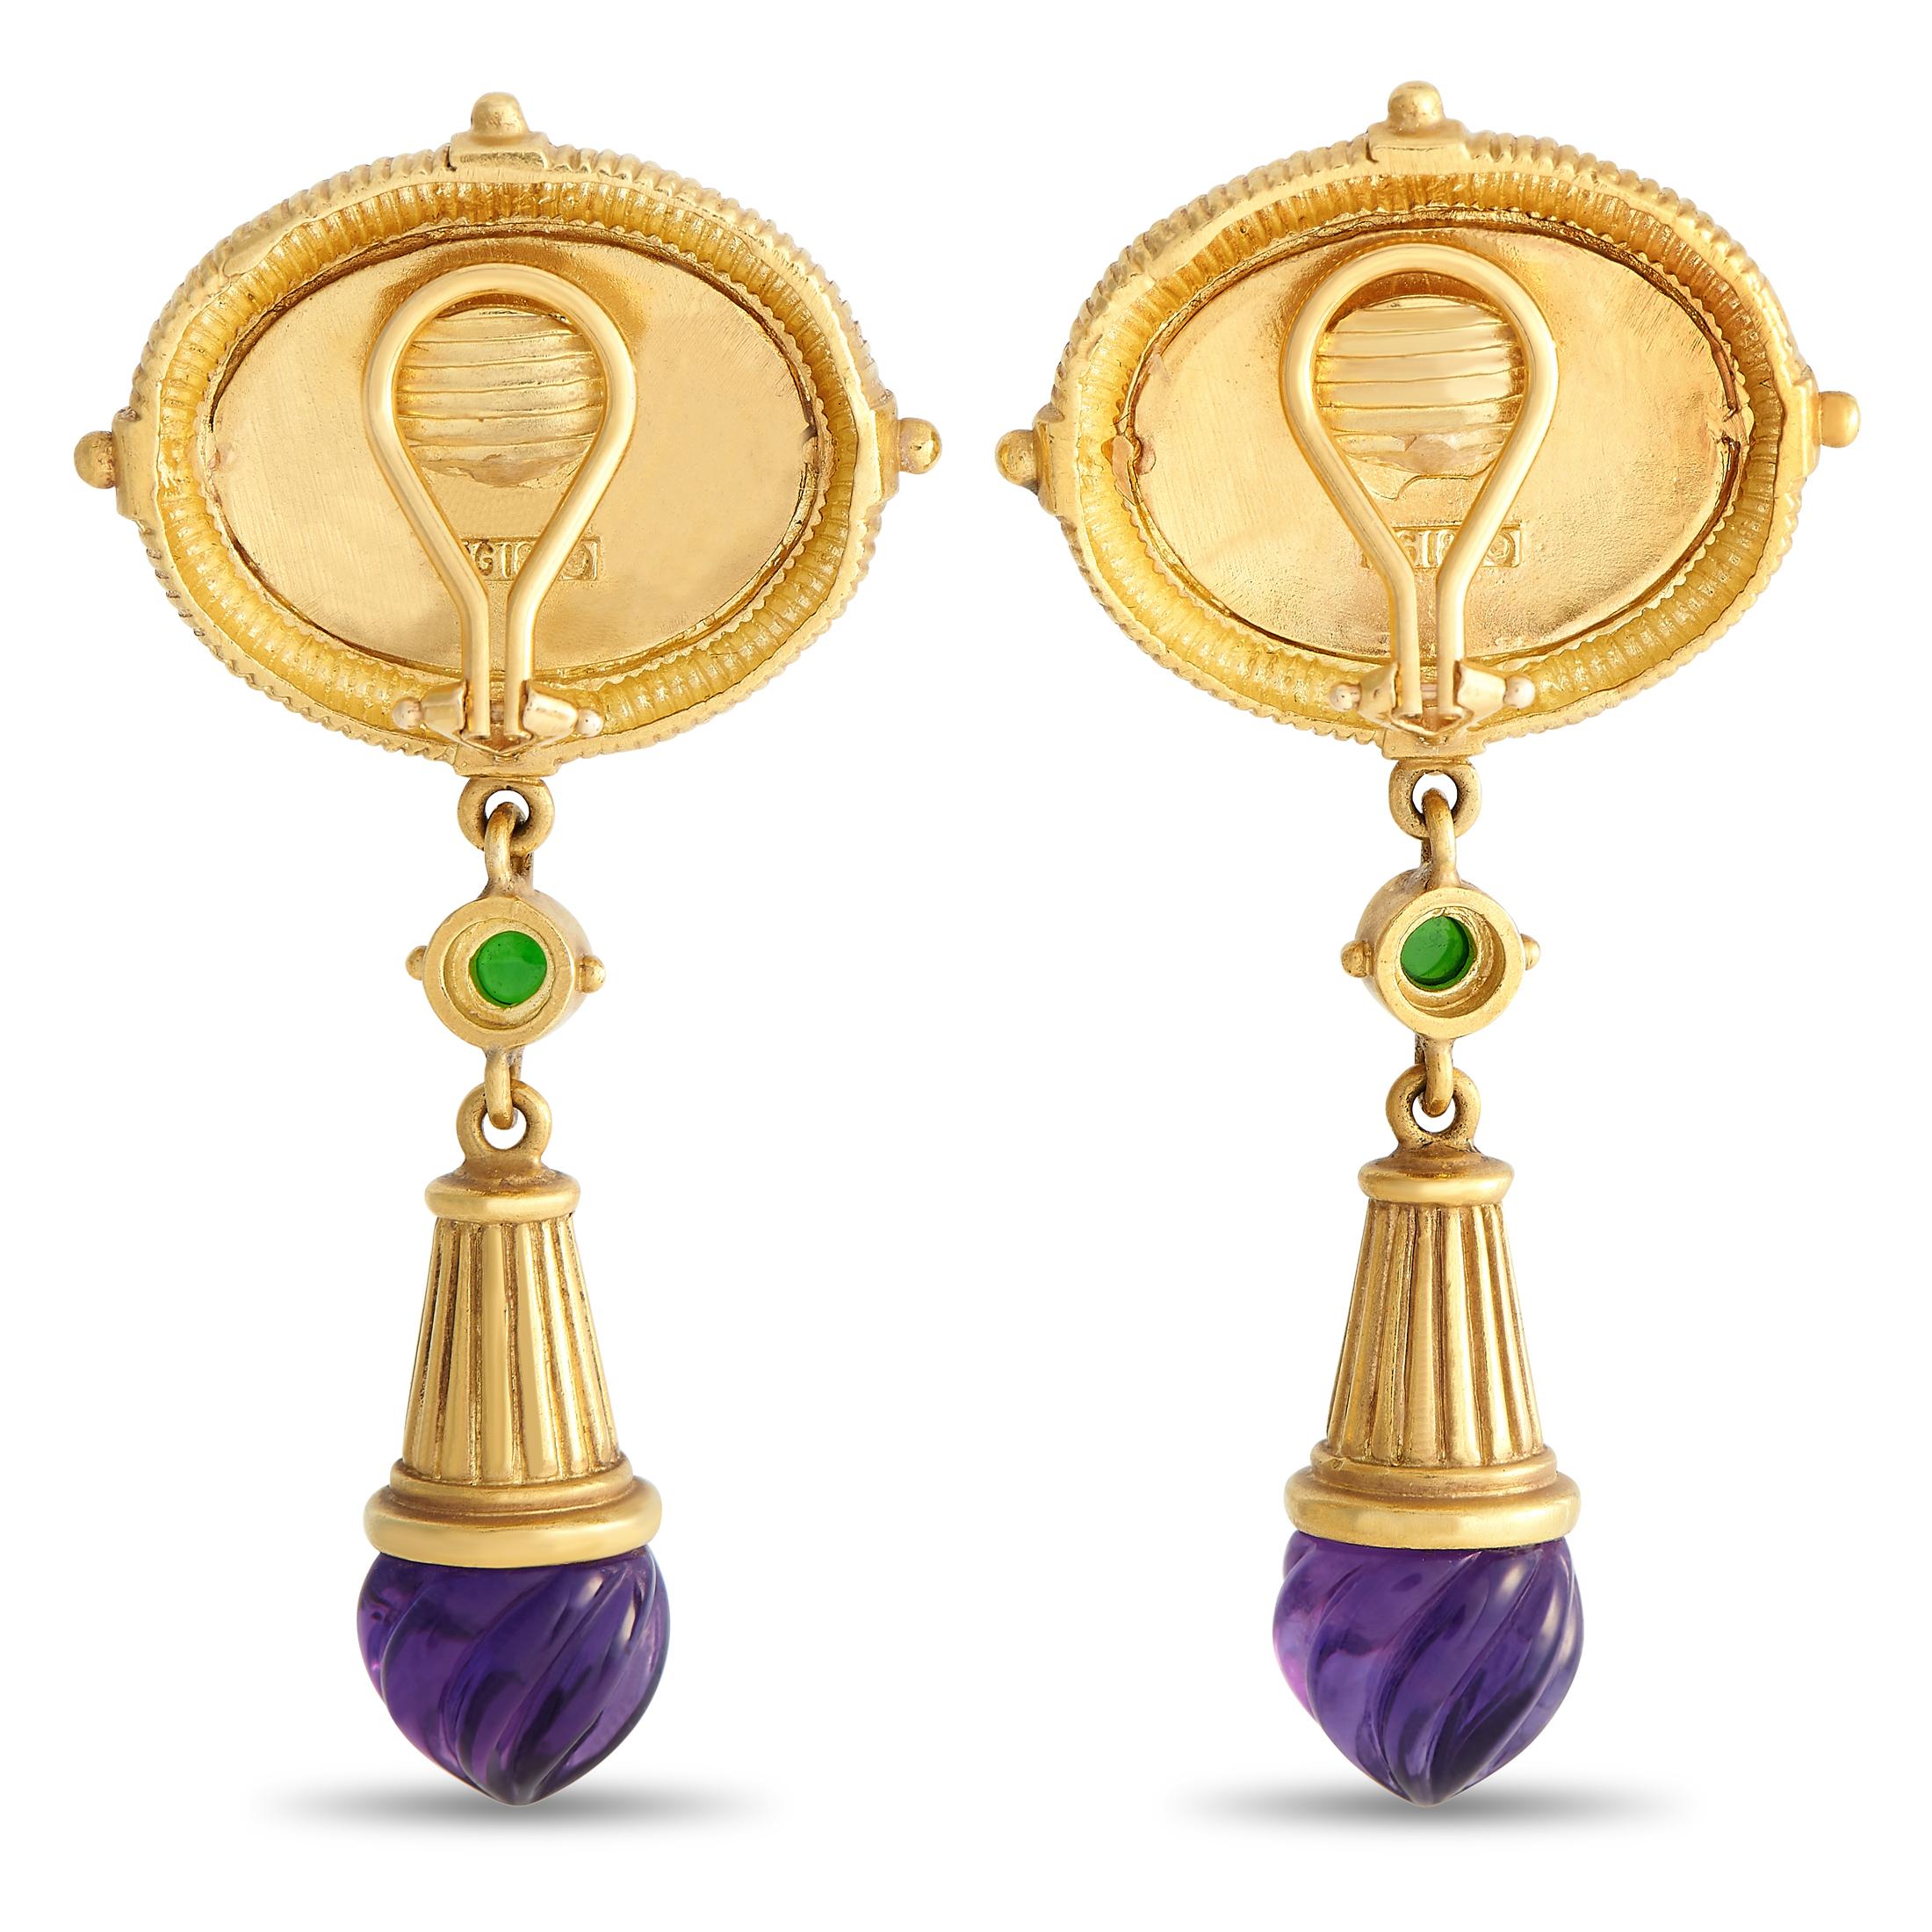 An elegant and artful piece of yellow gold jewelry to add to your collection. This vintage creation from SeidenGang features the brand's unmistakable craftsmanship and attention to detail. The clip-on earrings are designed with an oval-shaped base